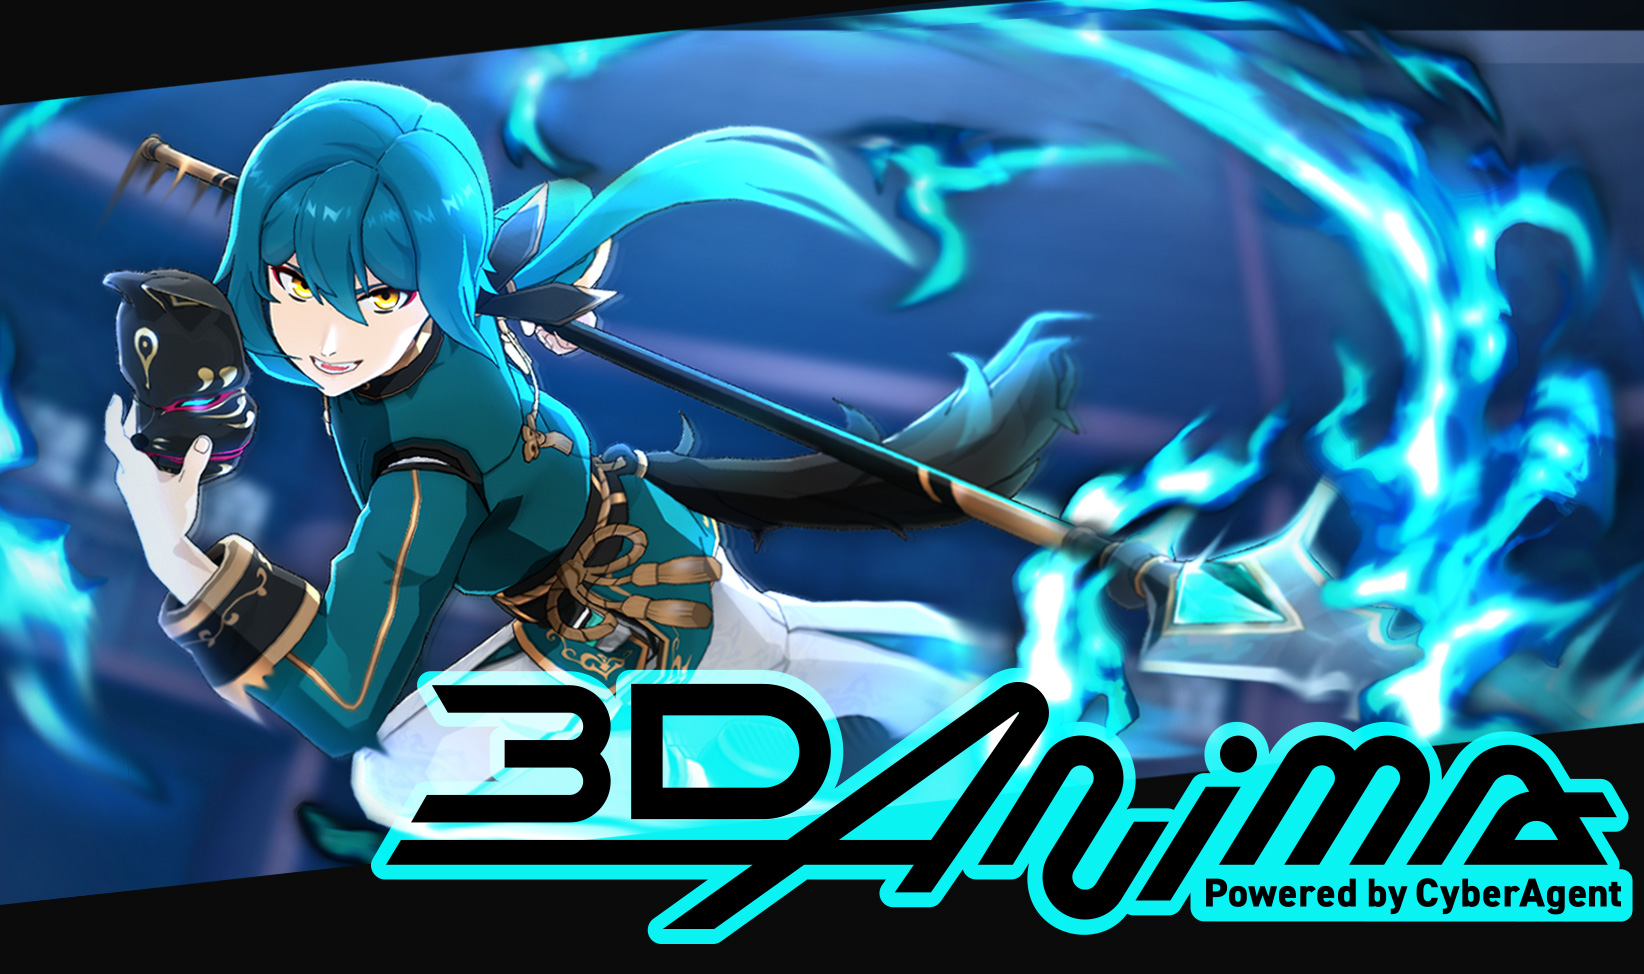 3D Anima powered by CyberAgent